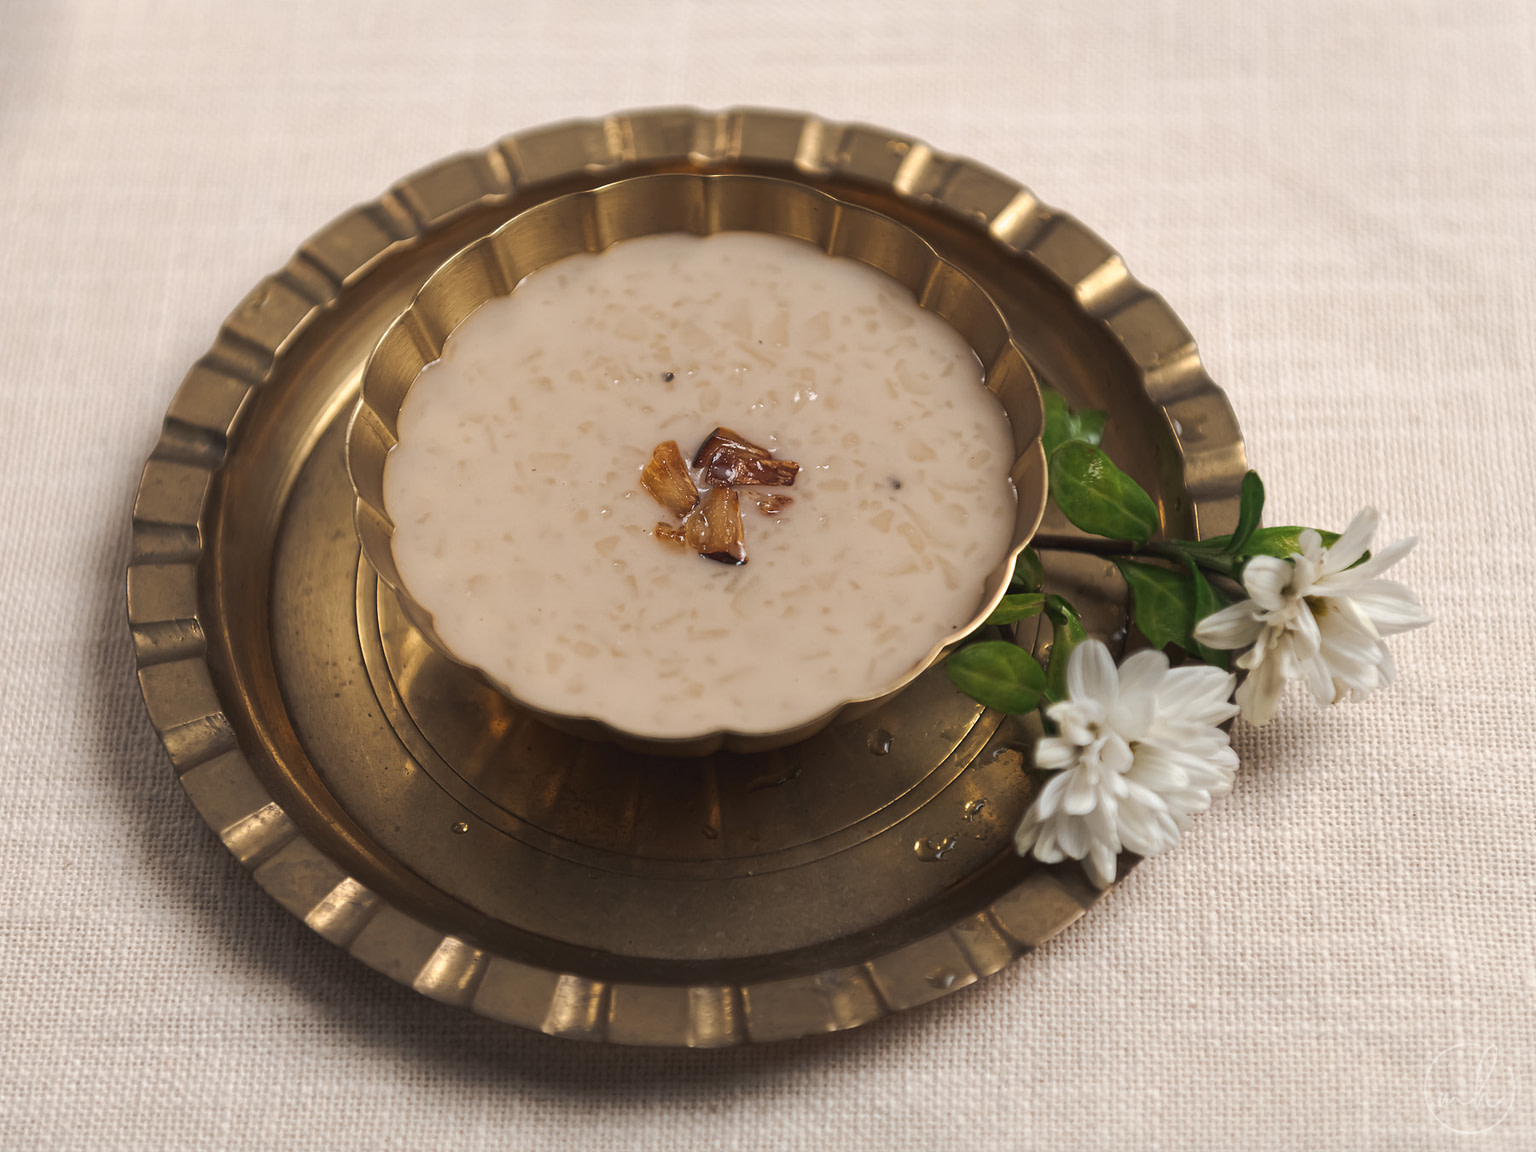 Palada served in a copper bowl, placed on a copper plate with flowers.